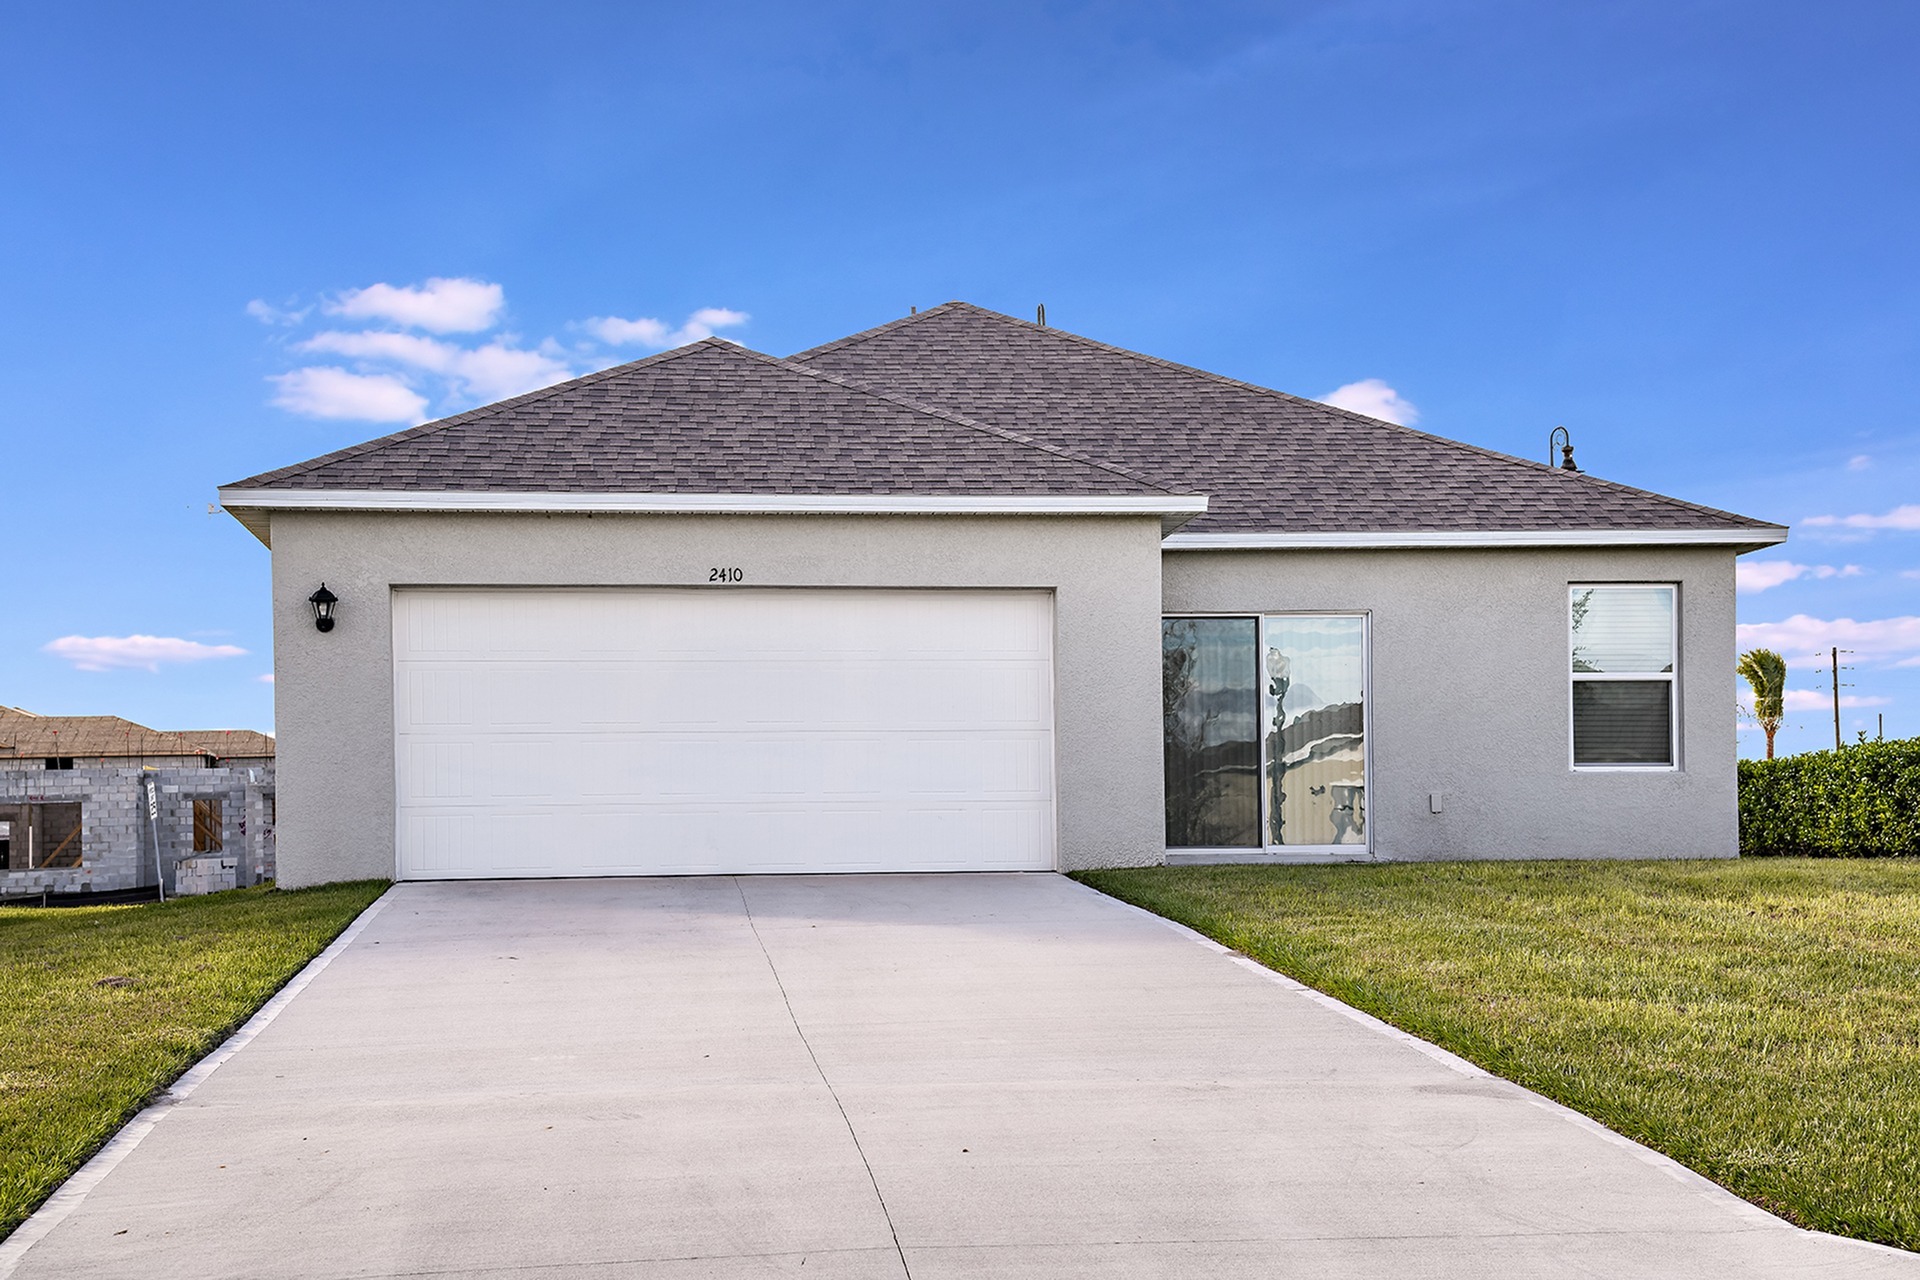 Exterior view with attached garage at a home for rent in Apopka, Florida.